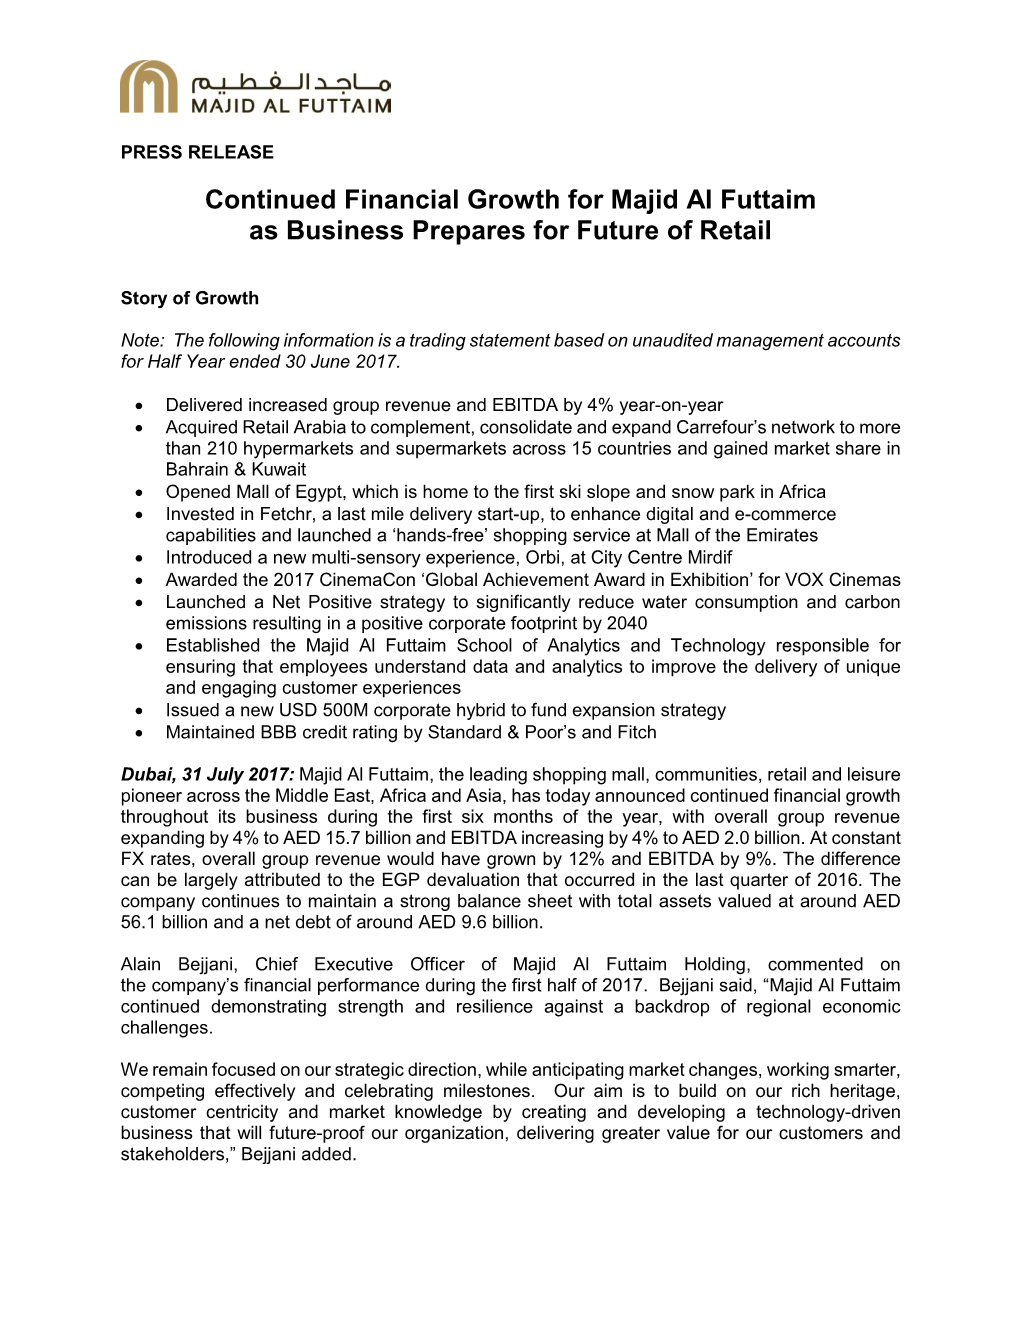 Continued Financial Growth for Majid Al Futtaim As Business Prepares for Future of Retail